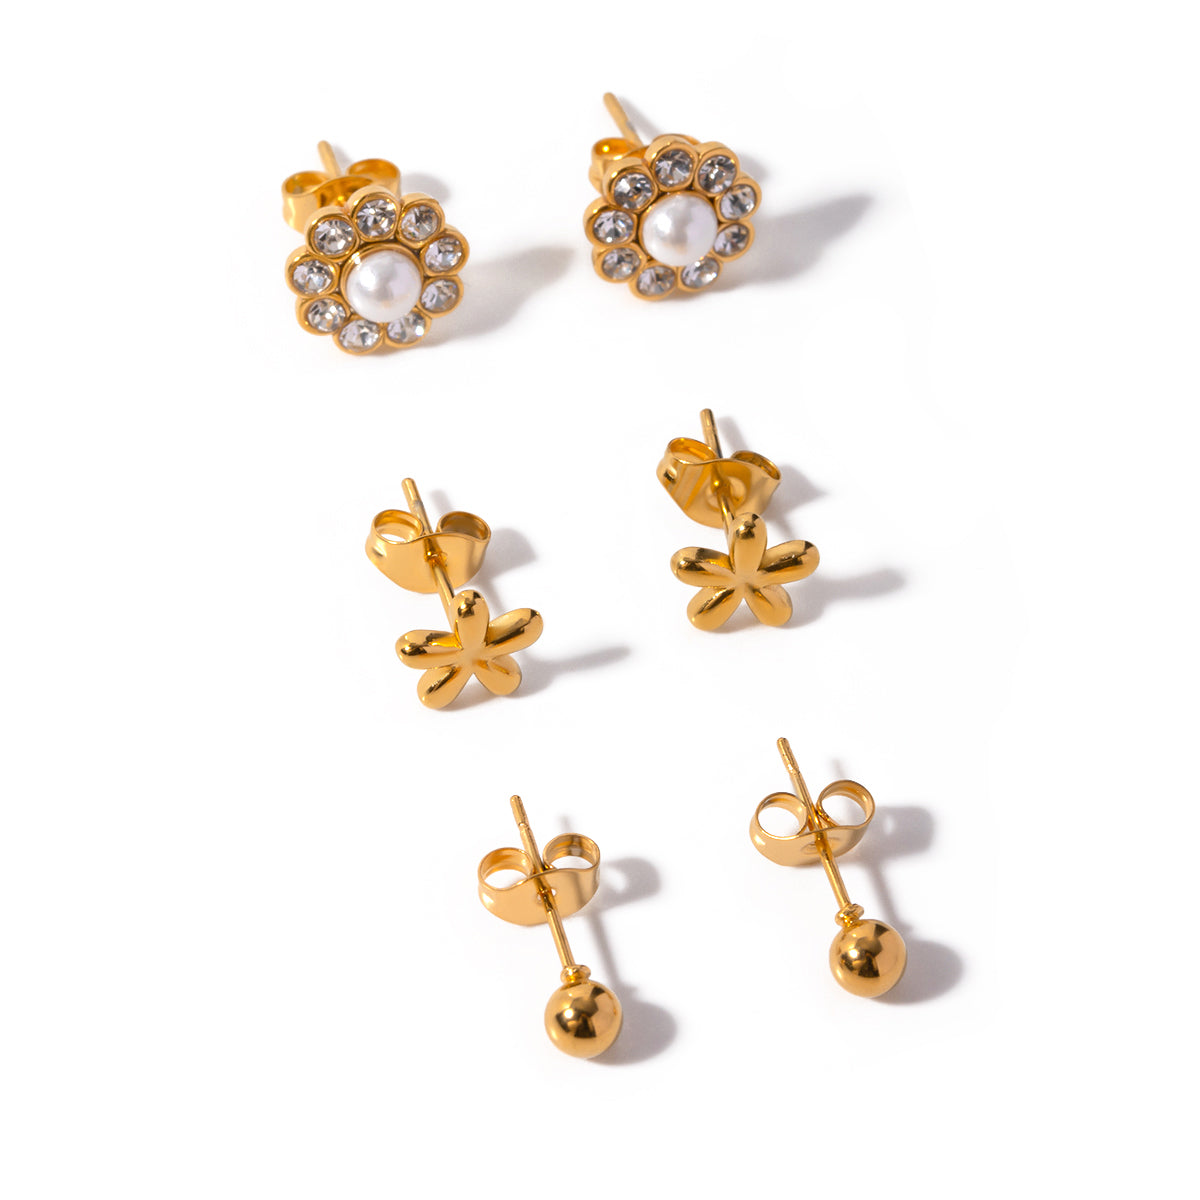 1 Set IG Style Flower 316 Stainless Steel  18K Gold Plated Ear Studs